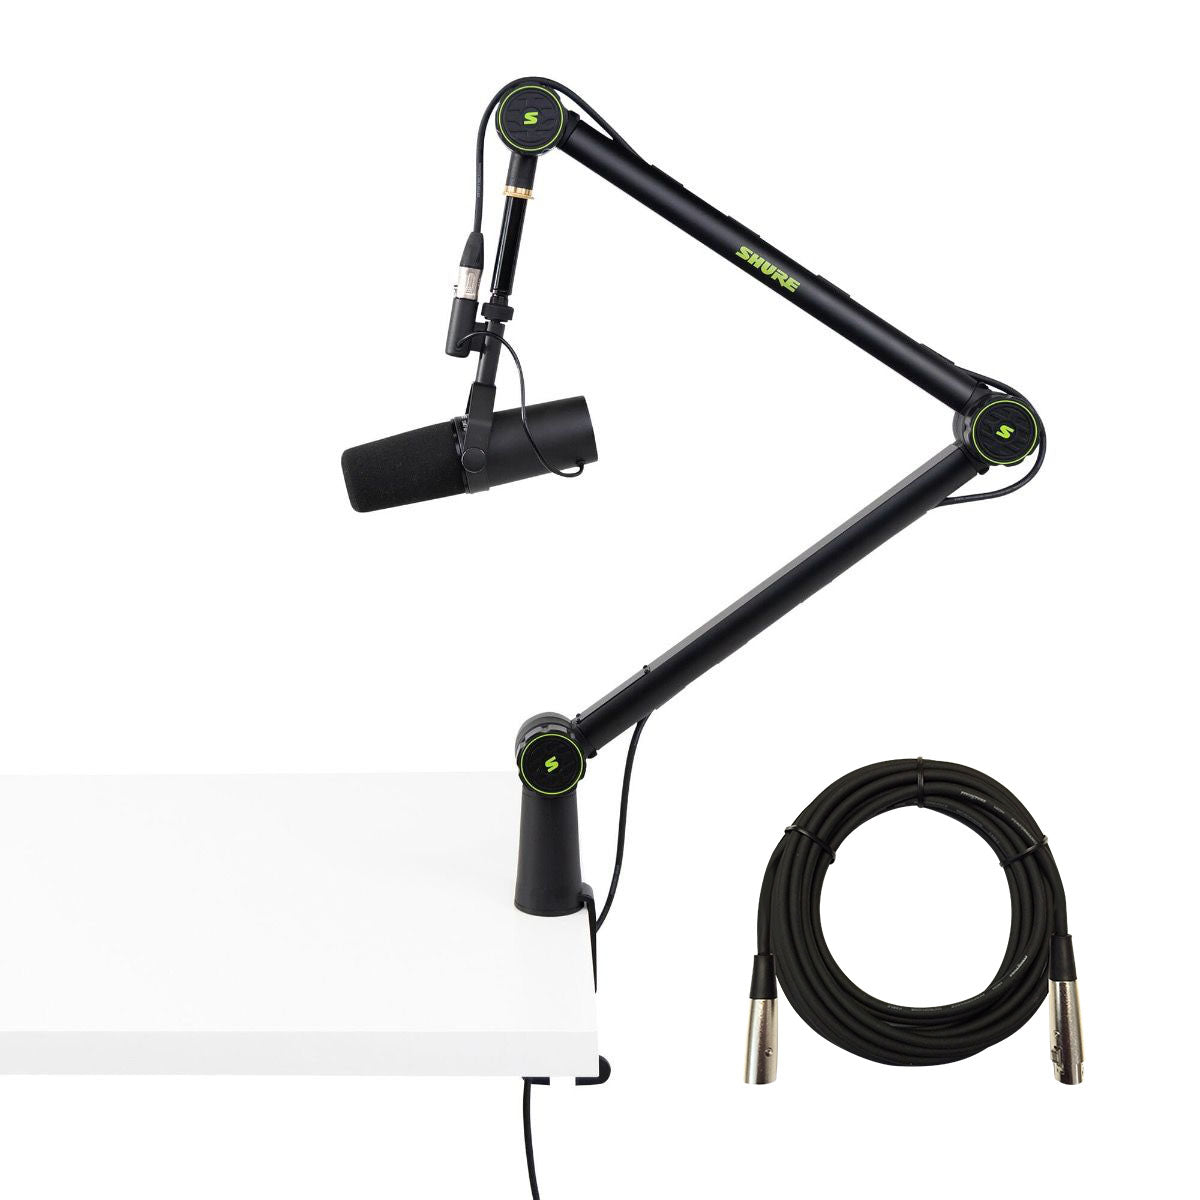 Shure SM7B Microphone Kit with Cloudlifter, Mic Stand, and Mic Cables